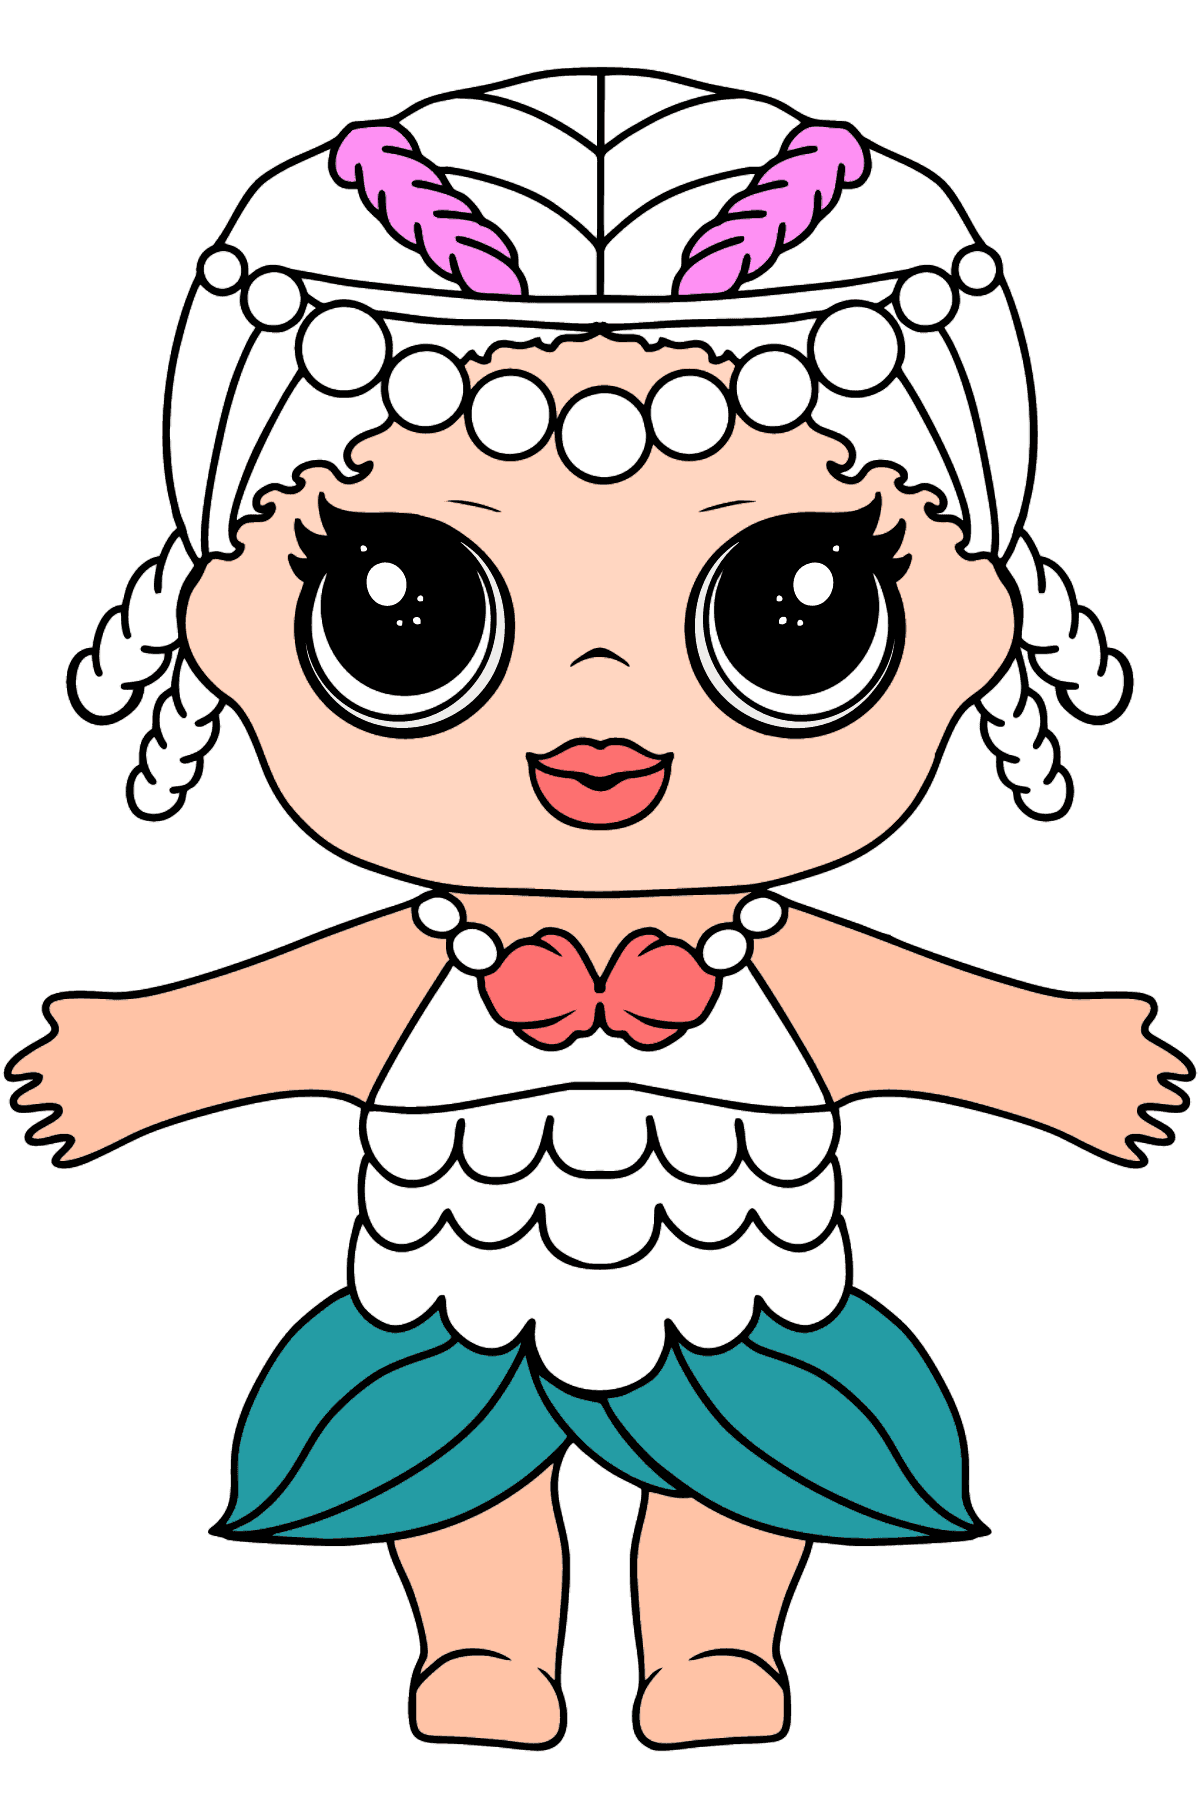 LOL Surprise Doll Merbaby Coloring page - Coloring Pages for Kids